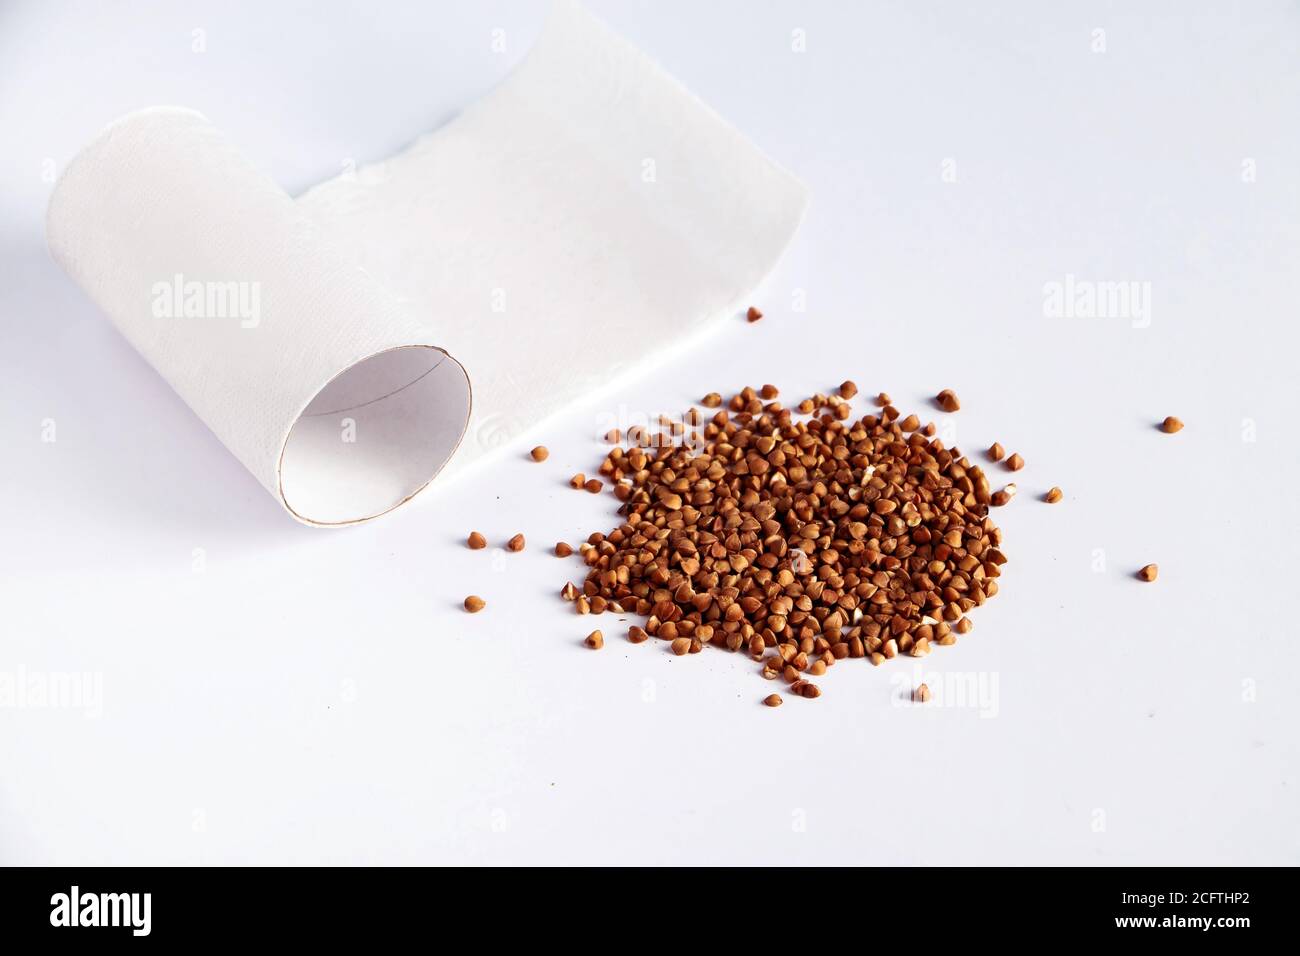 Toilet paper and buckwheat on a white background. Concept panic buying food at a quarantine. The coronavirus epidemic. Stock Photo